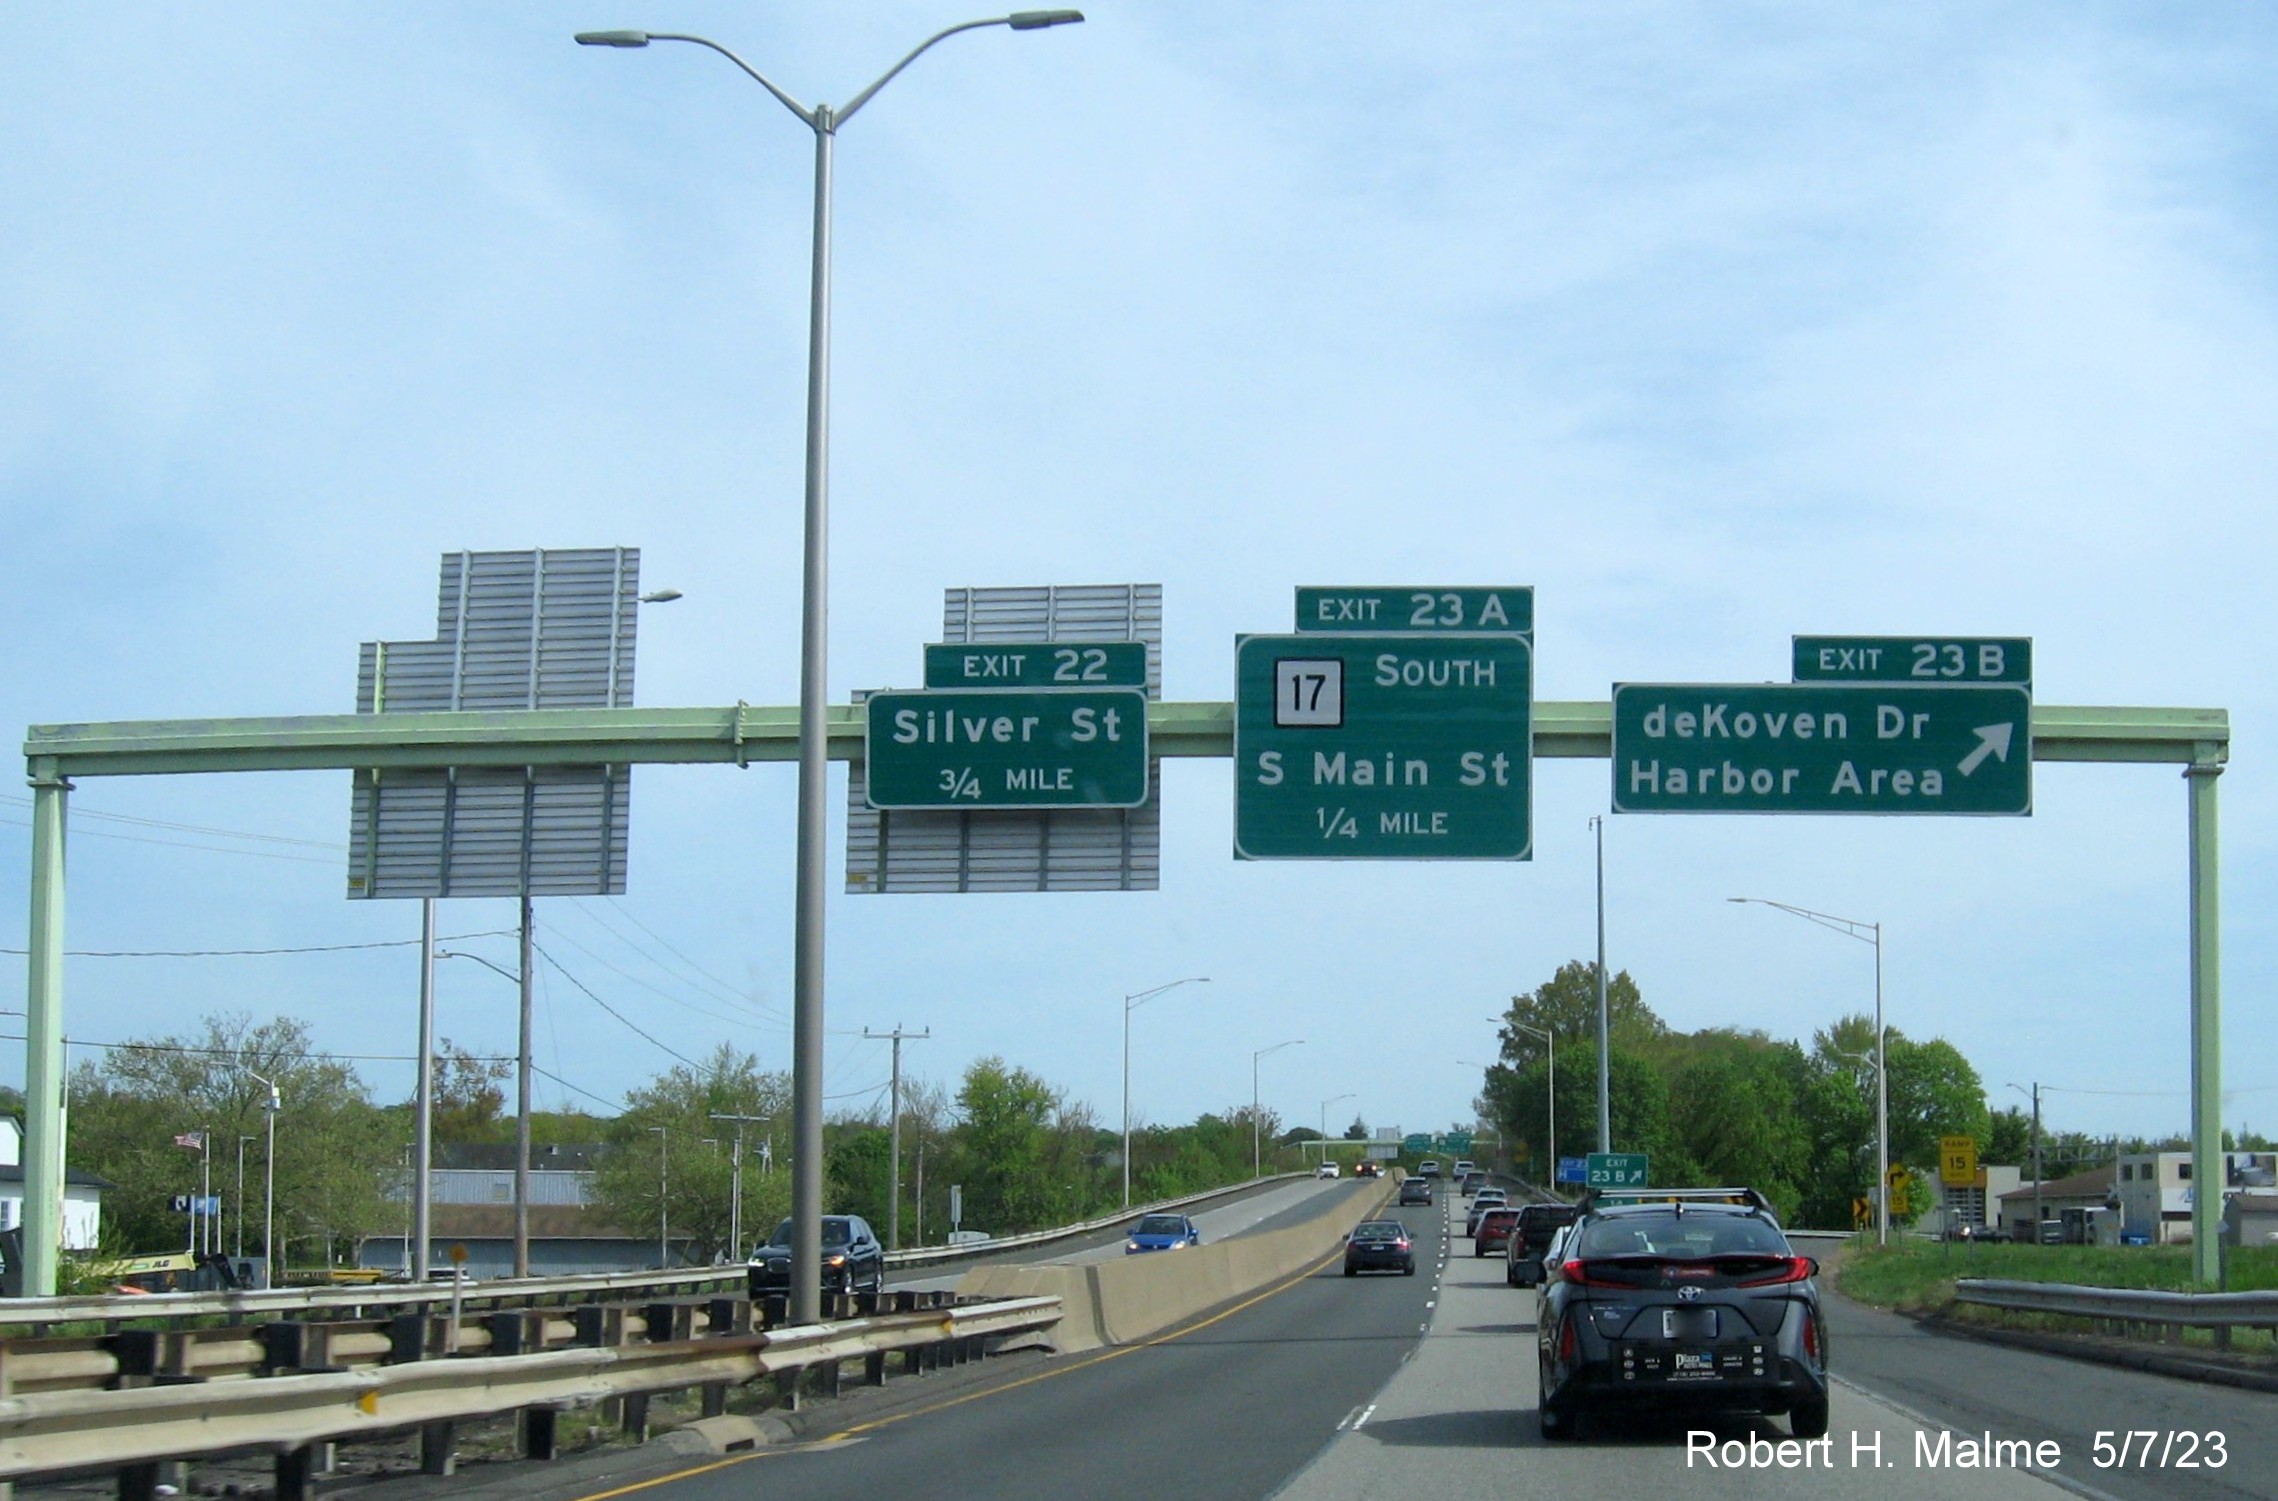 Image of overhead ramp sign for deKoven Drive exit with new milepost based exit number and Old Exit 14 sign below on CT 9 South in Middletown, May 2023